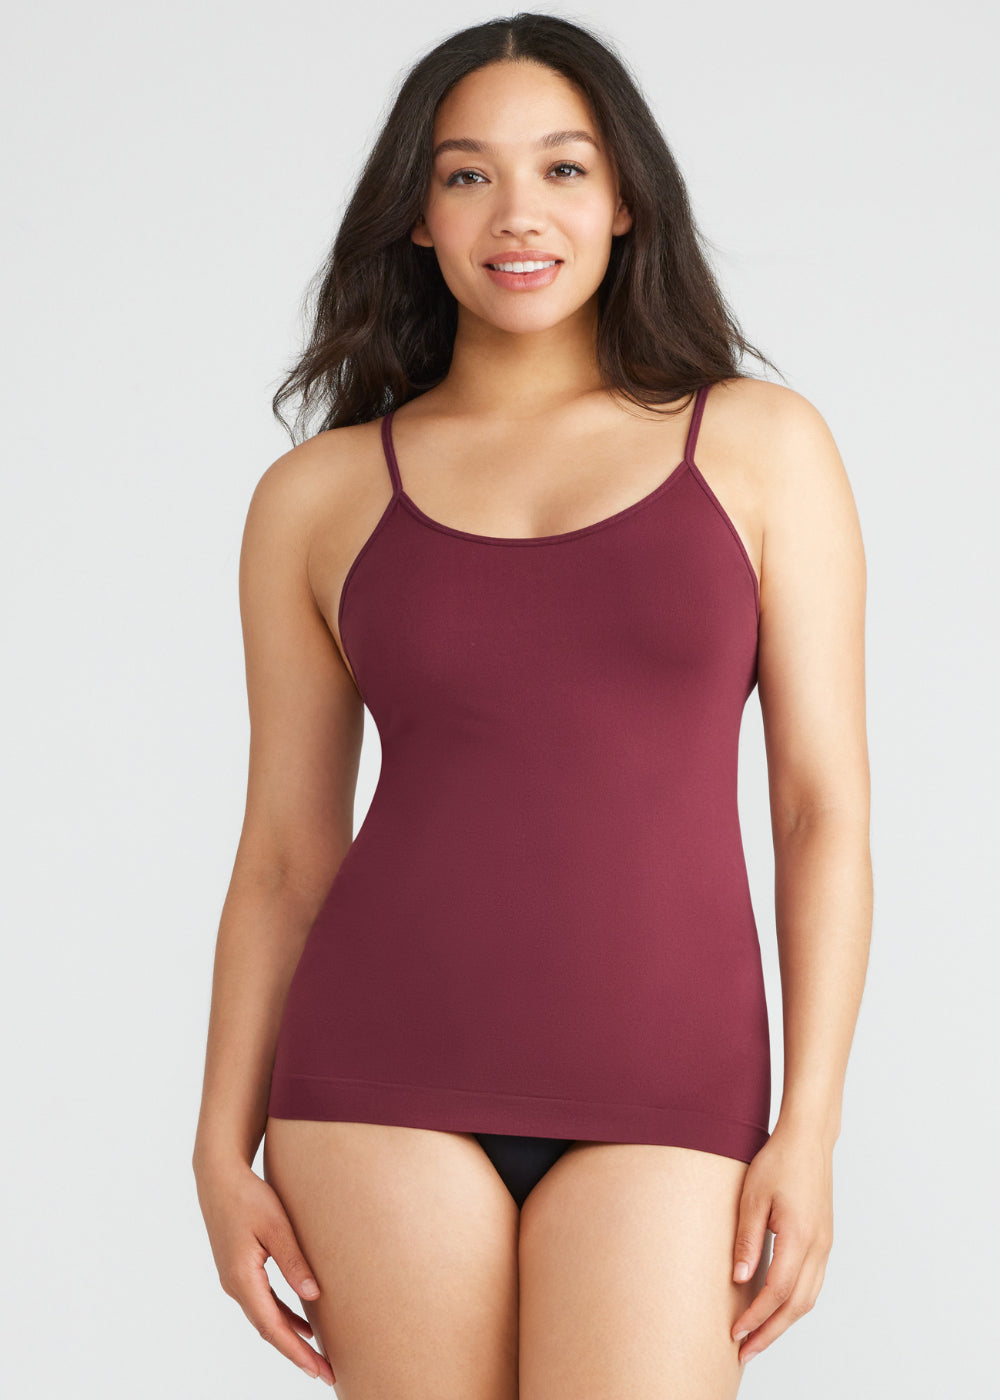 Non-Shaping Camisole - Seamless - TEST from Yummie in Windsor Wine  - 1